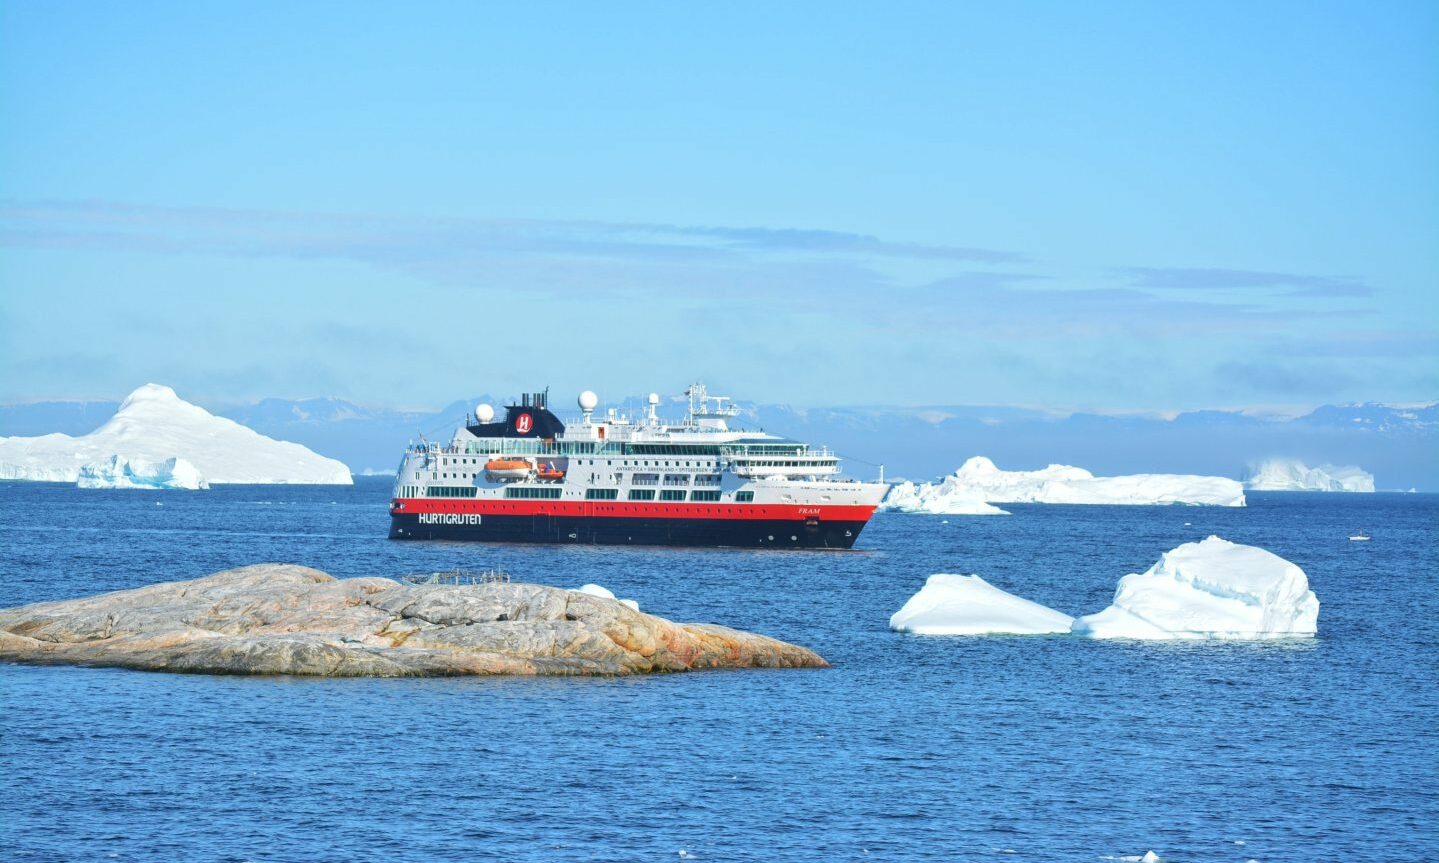 Ilulissat, Greenland - July 4th 2016, Disko Bay Kangia Icefjord, Jakobshavn - huge icebergs in the blue sea on a sunny day, UNESCO world heritage - Hurtigruten ship anchored in the bay